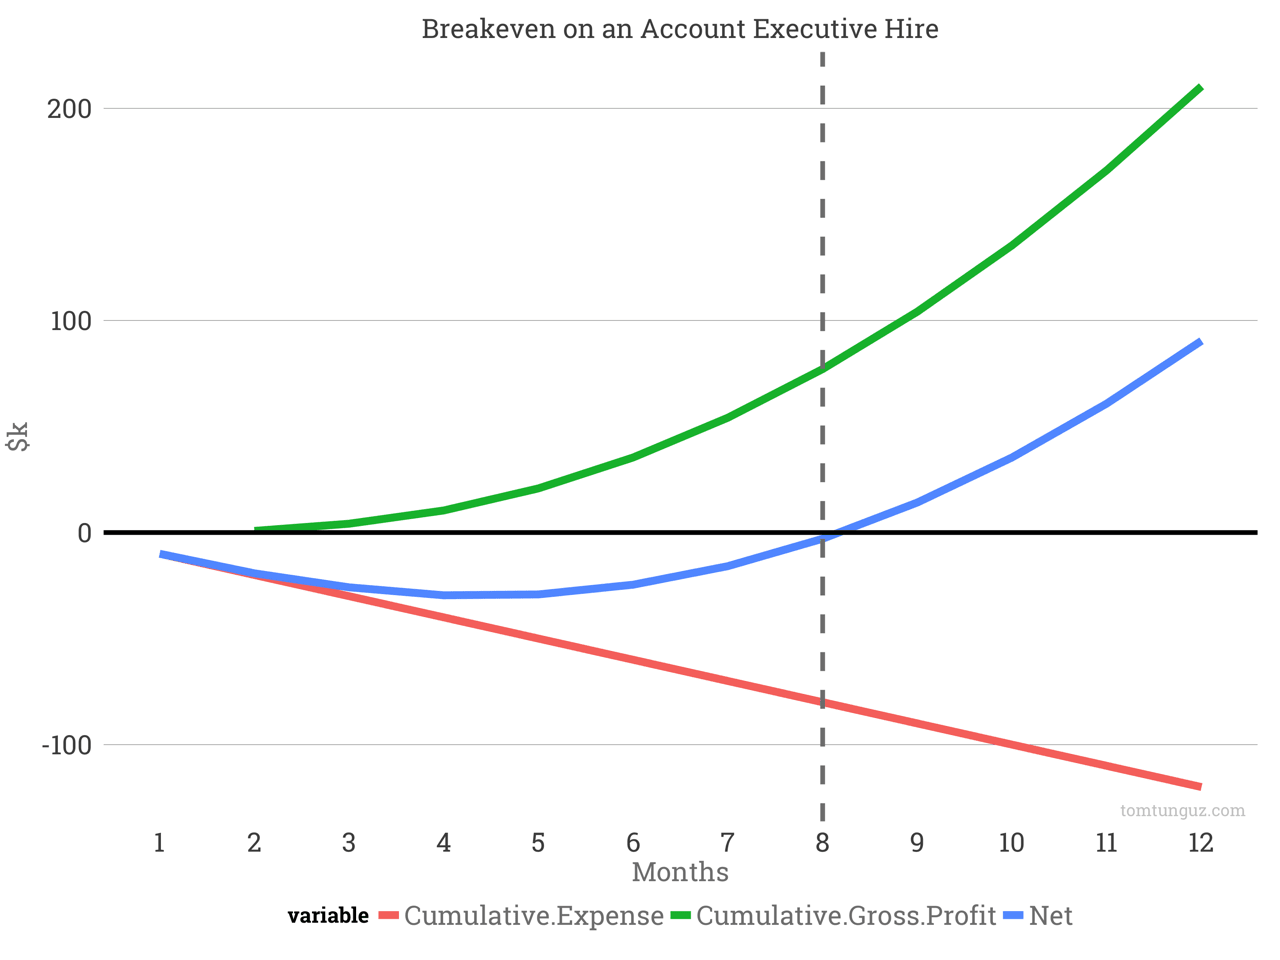 Breakeven for account executive hire